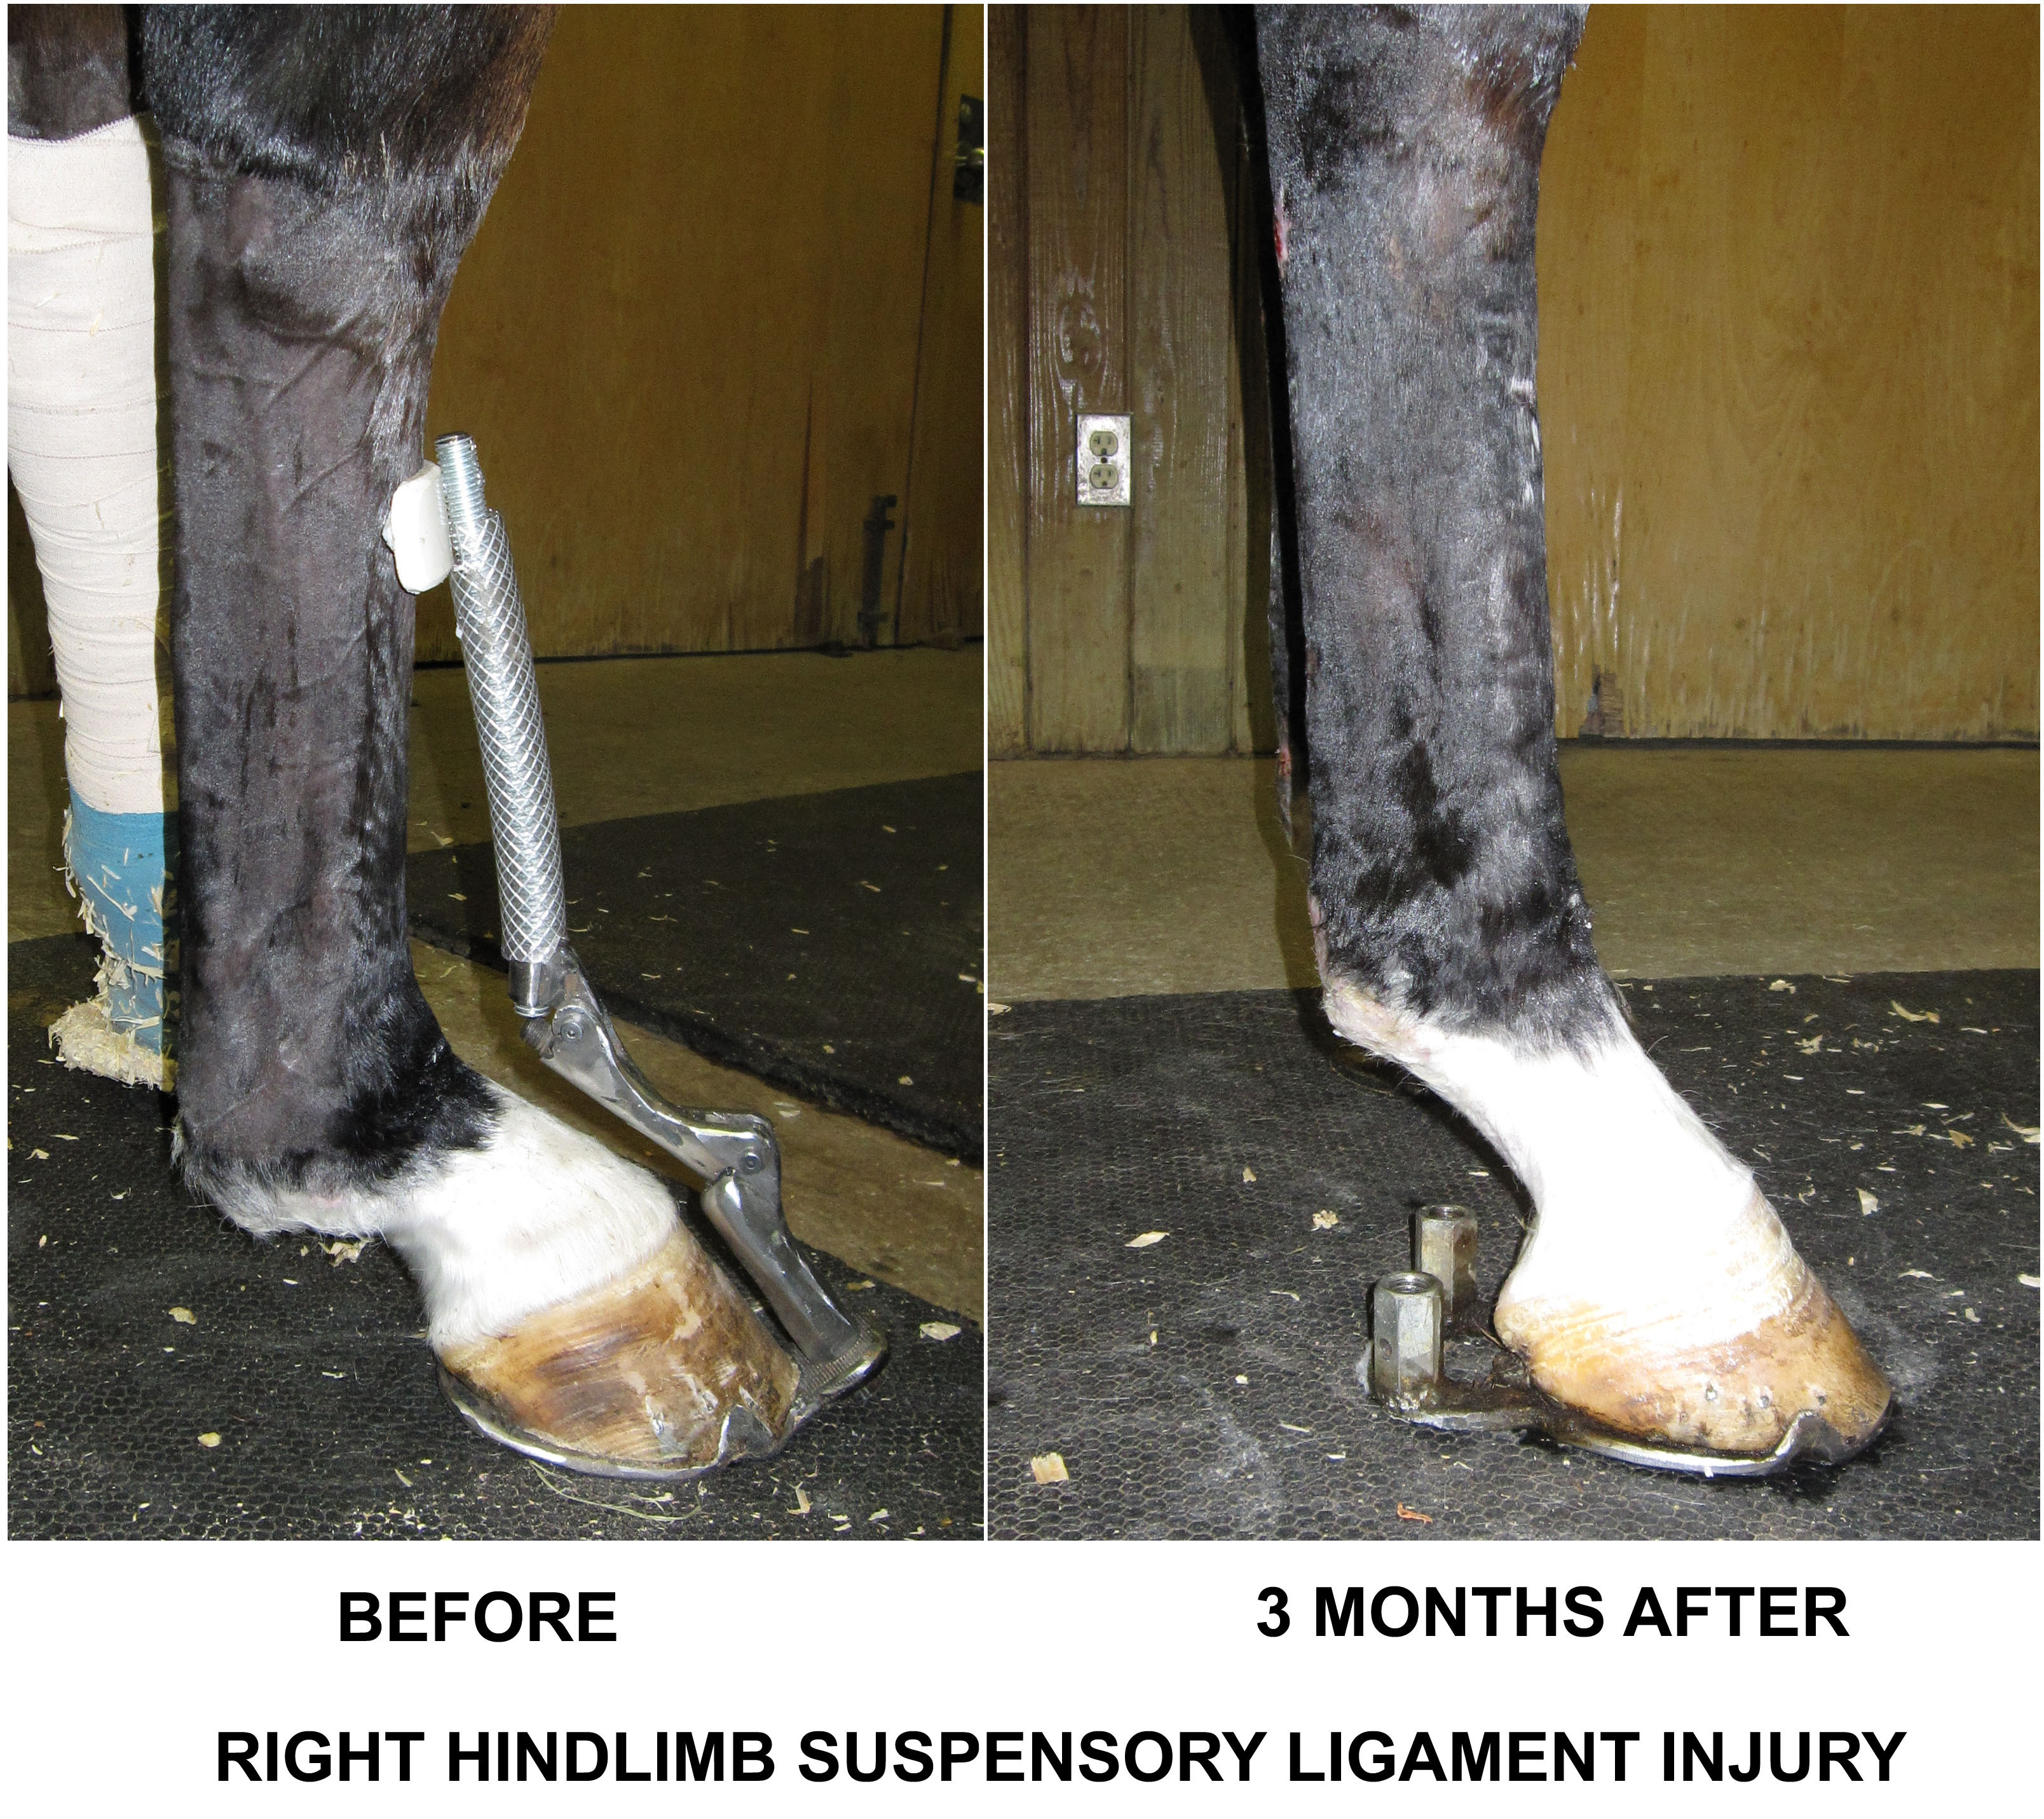 Before treatment, the horse's right fetlock (pictured at left) was measured at a 125-degree angle; after three months of treatment (image on right) the angle of the joint is in a more normal position. The horse is currently wearing normal shoes.